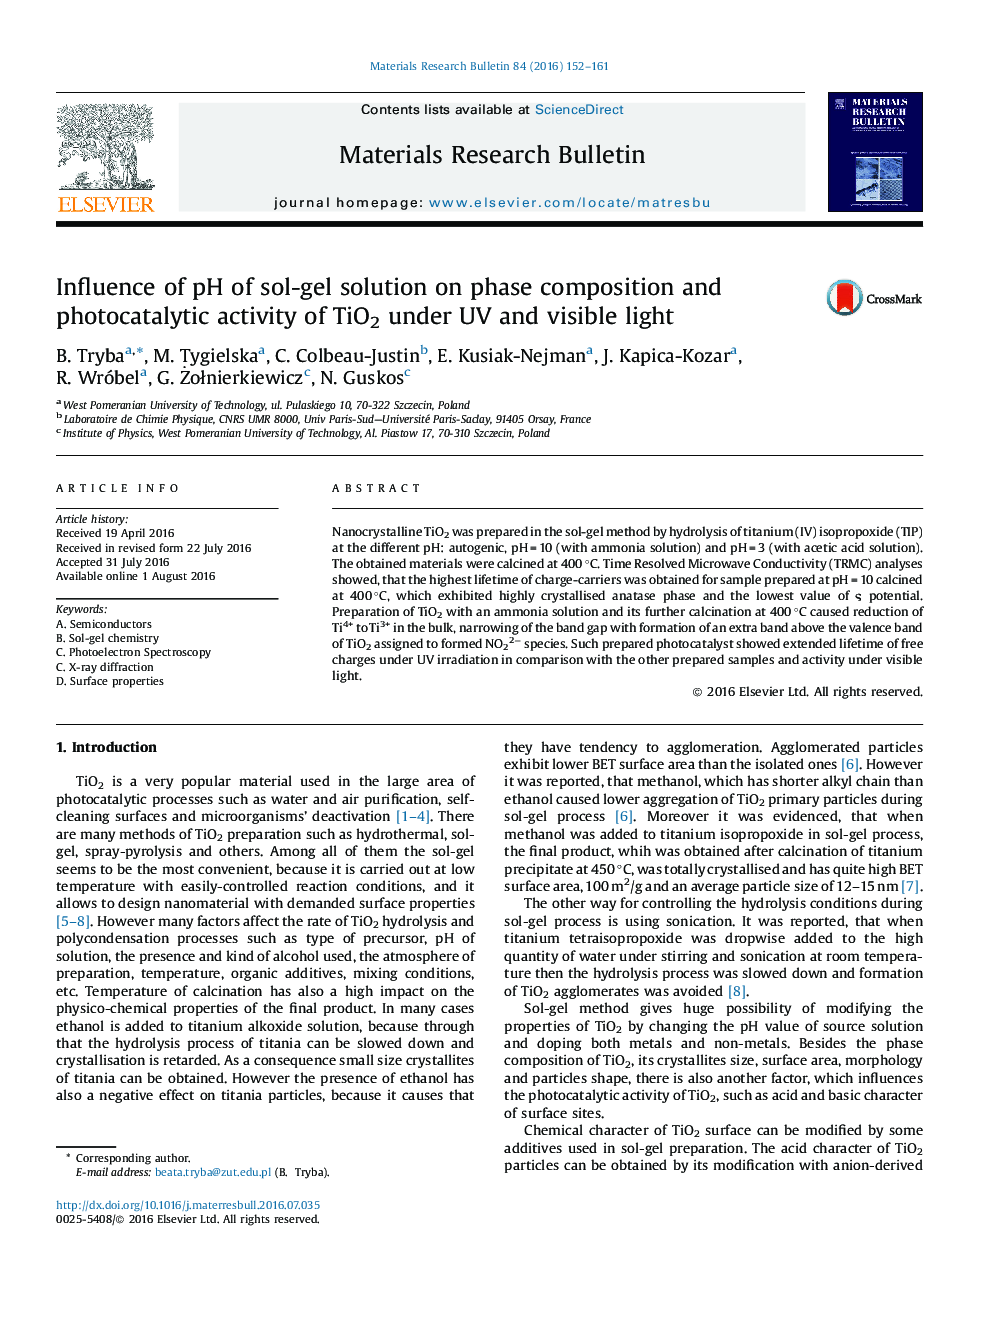 Influence of pH of sol-gel solution on phase composition and photocatalytic activity of TiO2 under UV and visible light